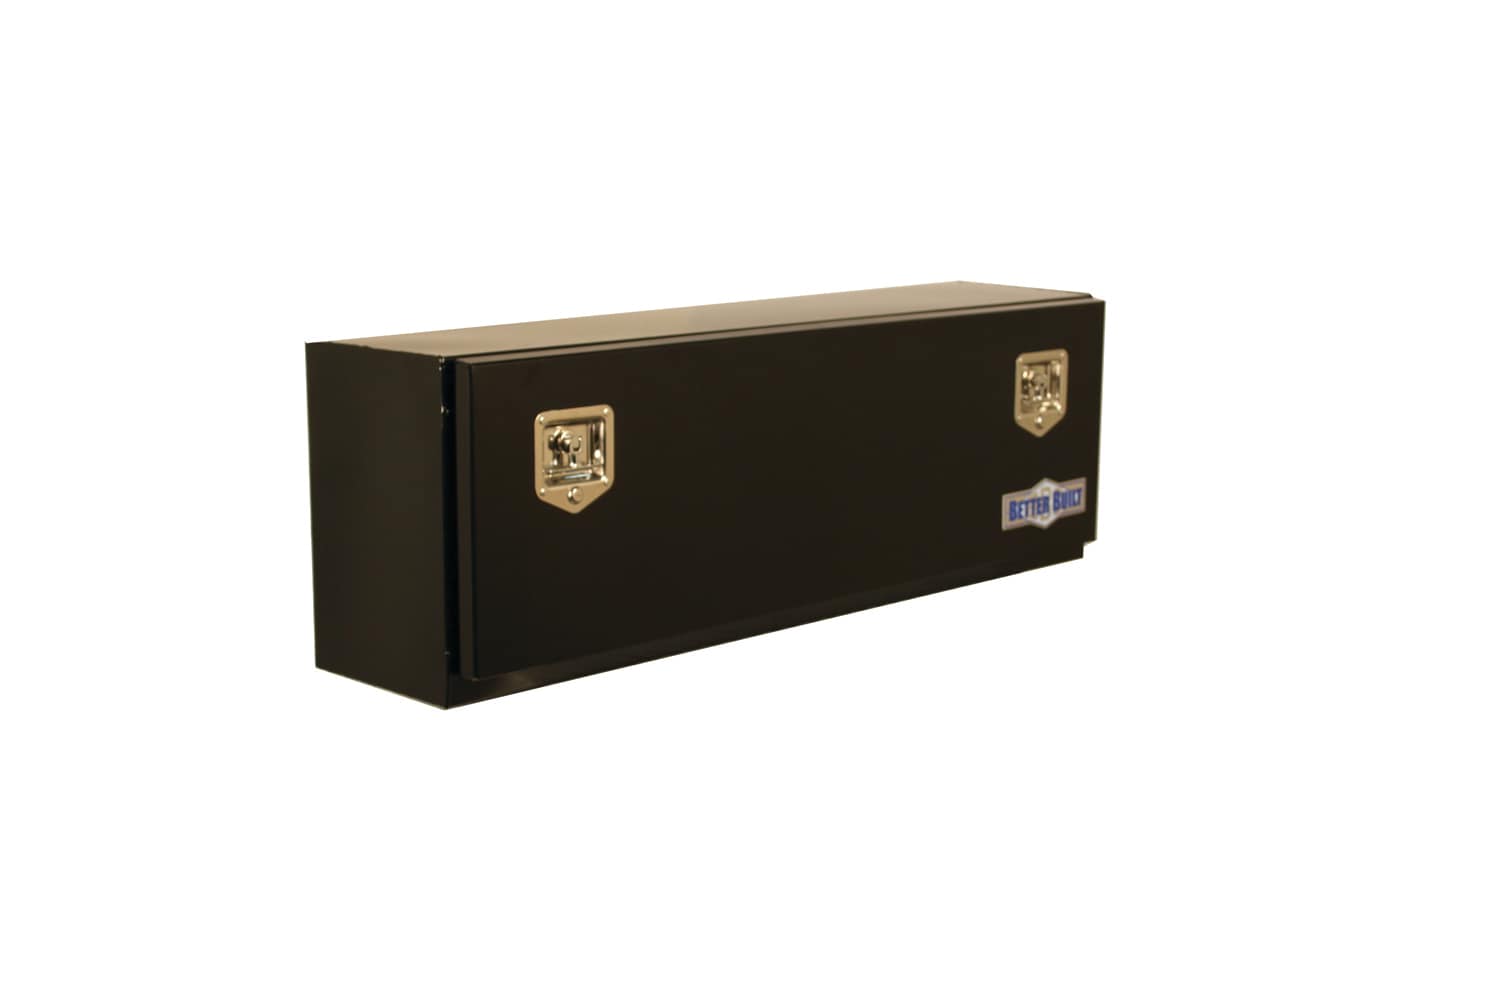 Better Built 48 in. x 18 in. x 20 in. Single-Lid Truck Tool Chest